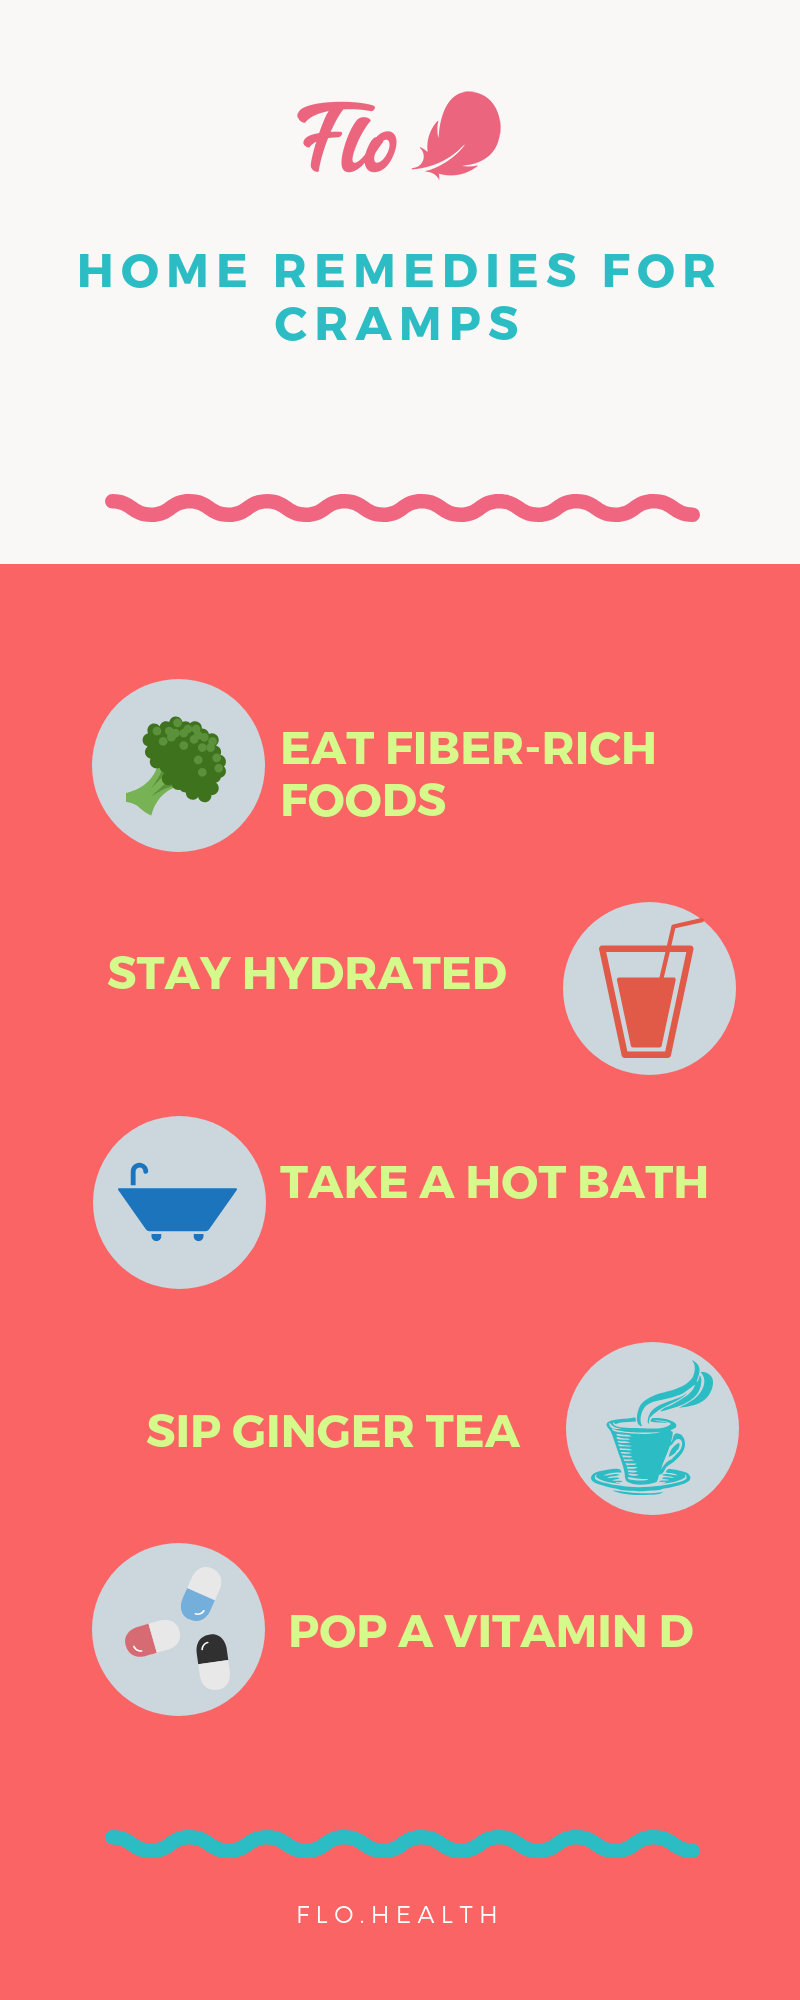 Home remedies for period cramps recommended by Flo (inforgraphic)